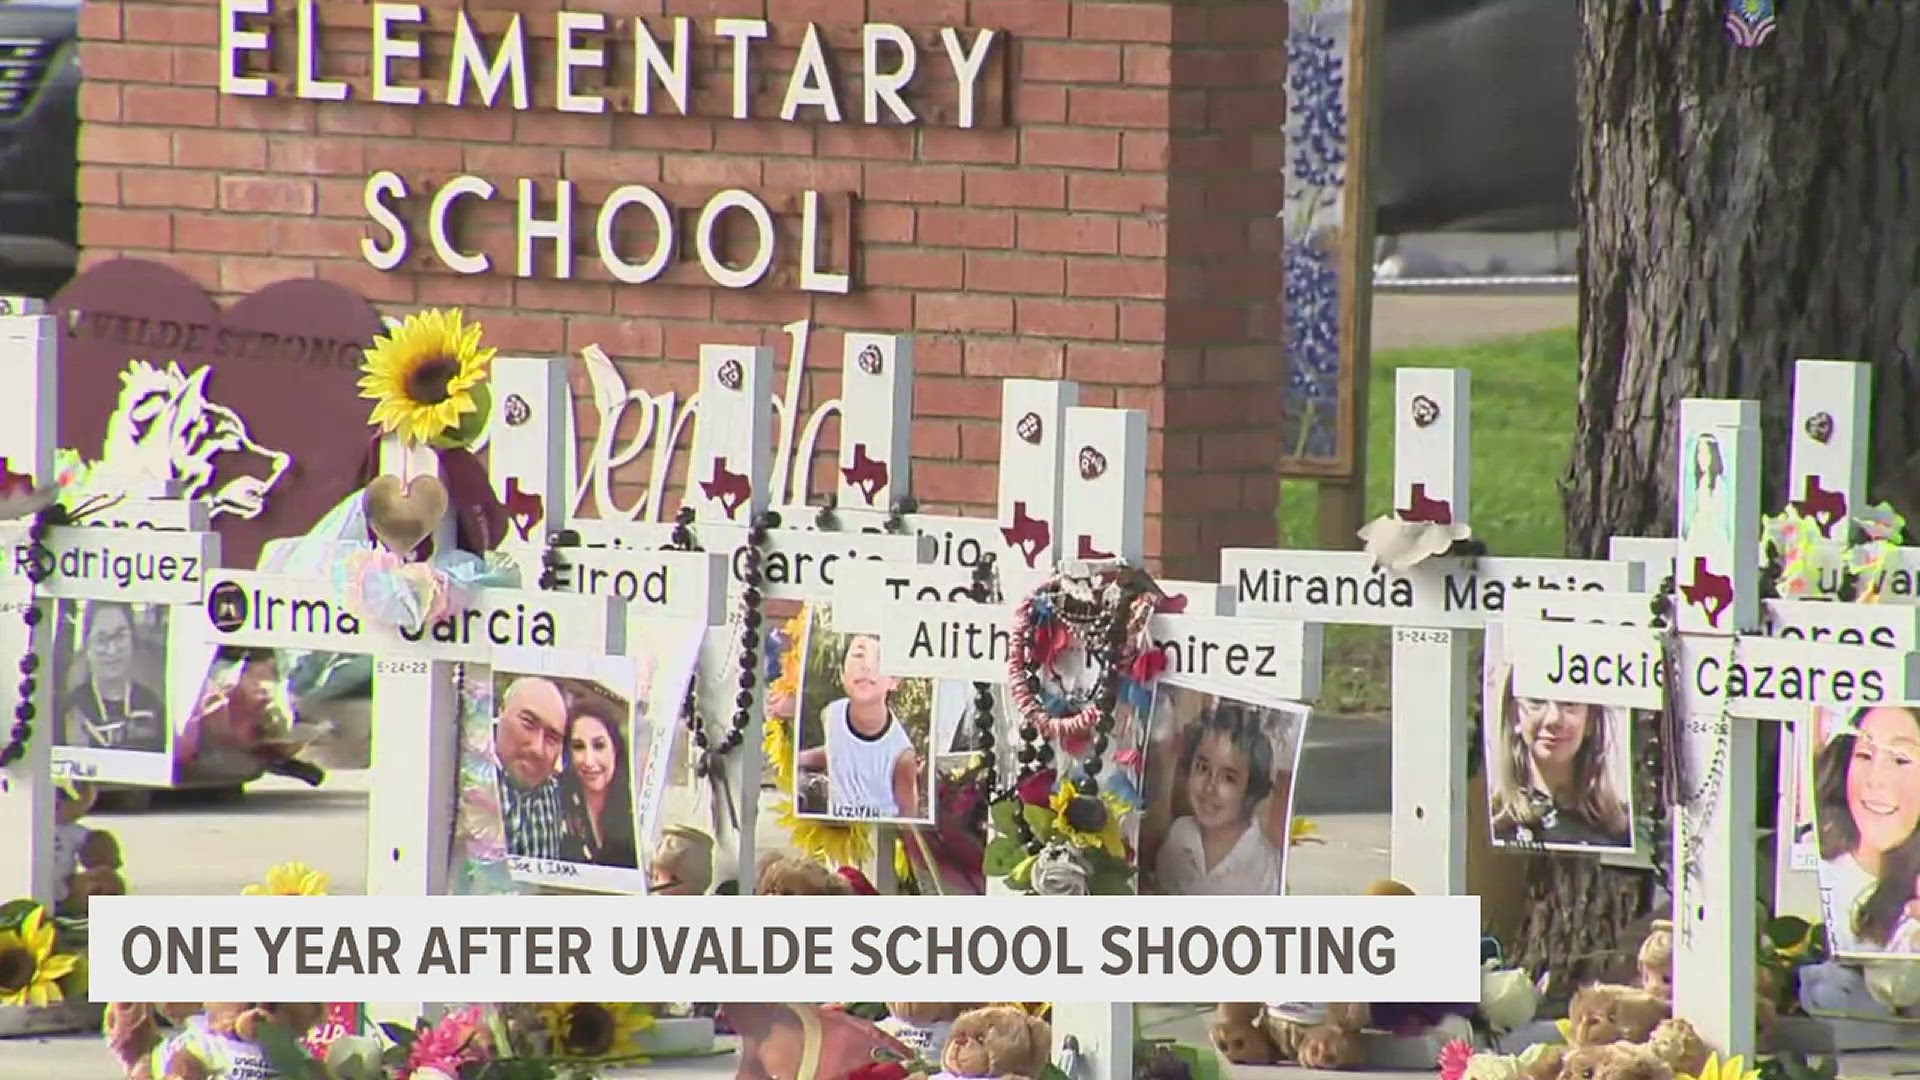 It has been 1 year since the Robb Elementary School shooting. The community gathers to honor the 19 students and 2 teachers that were killed that day.